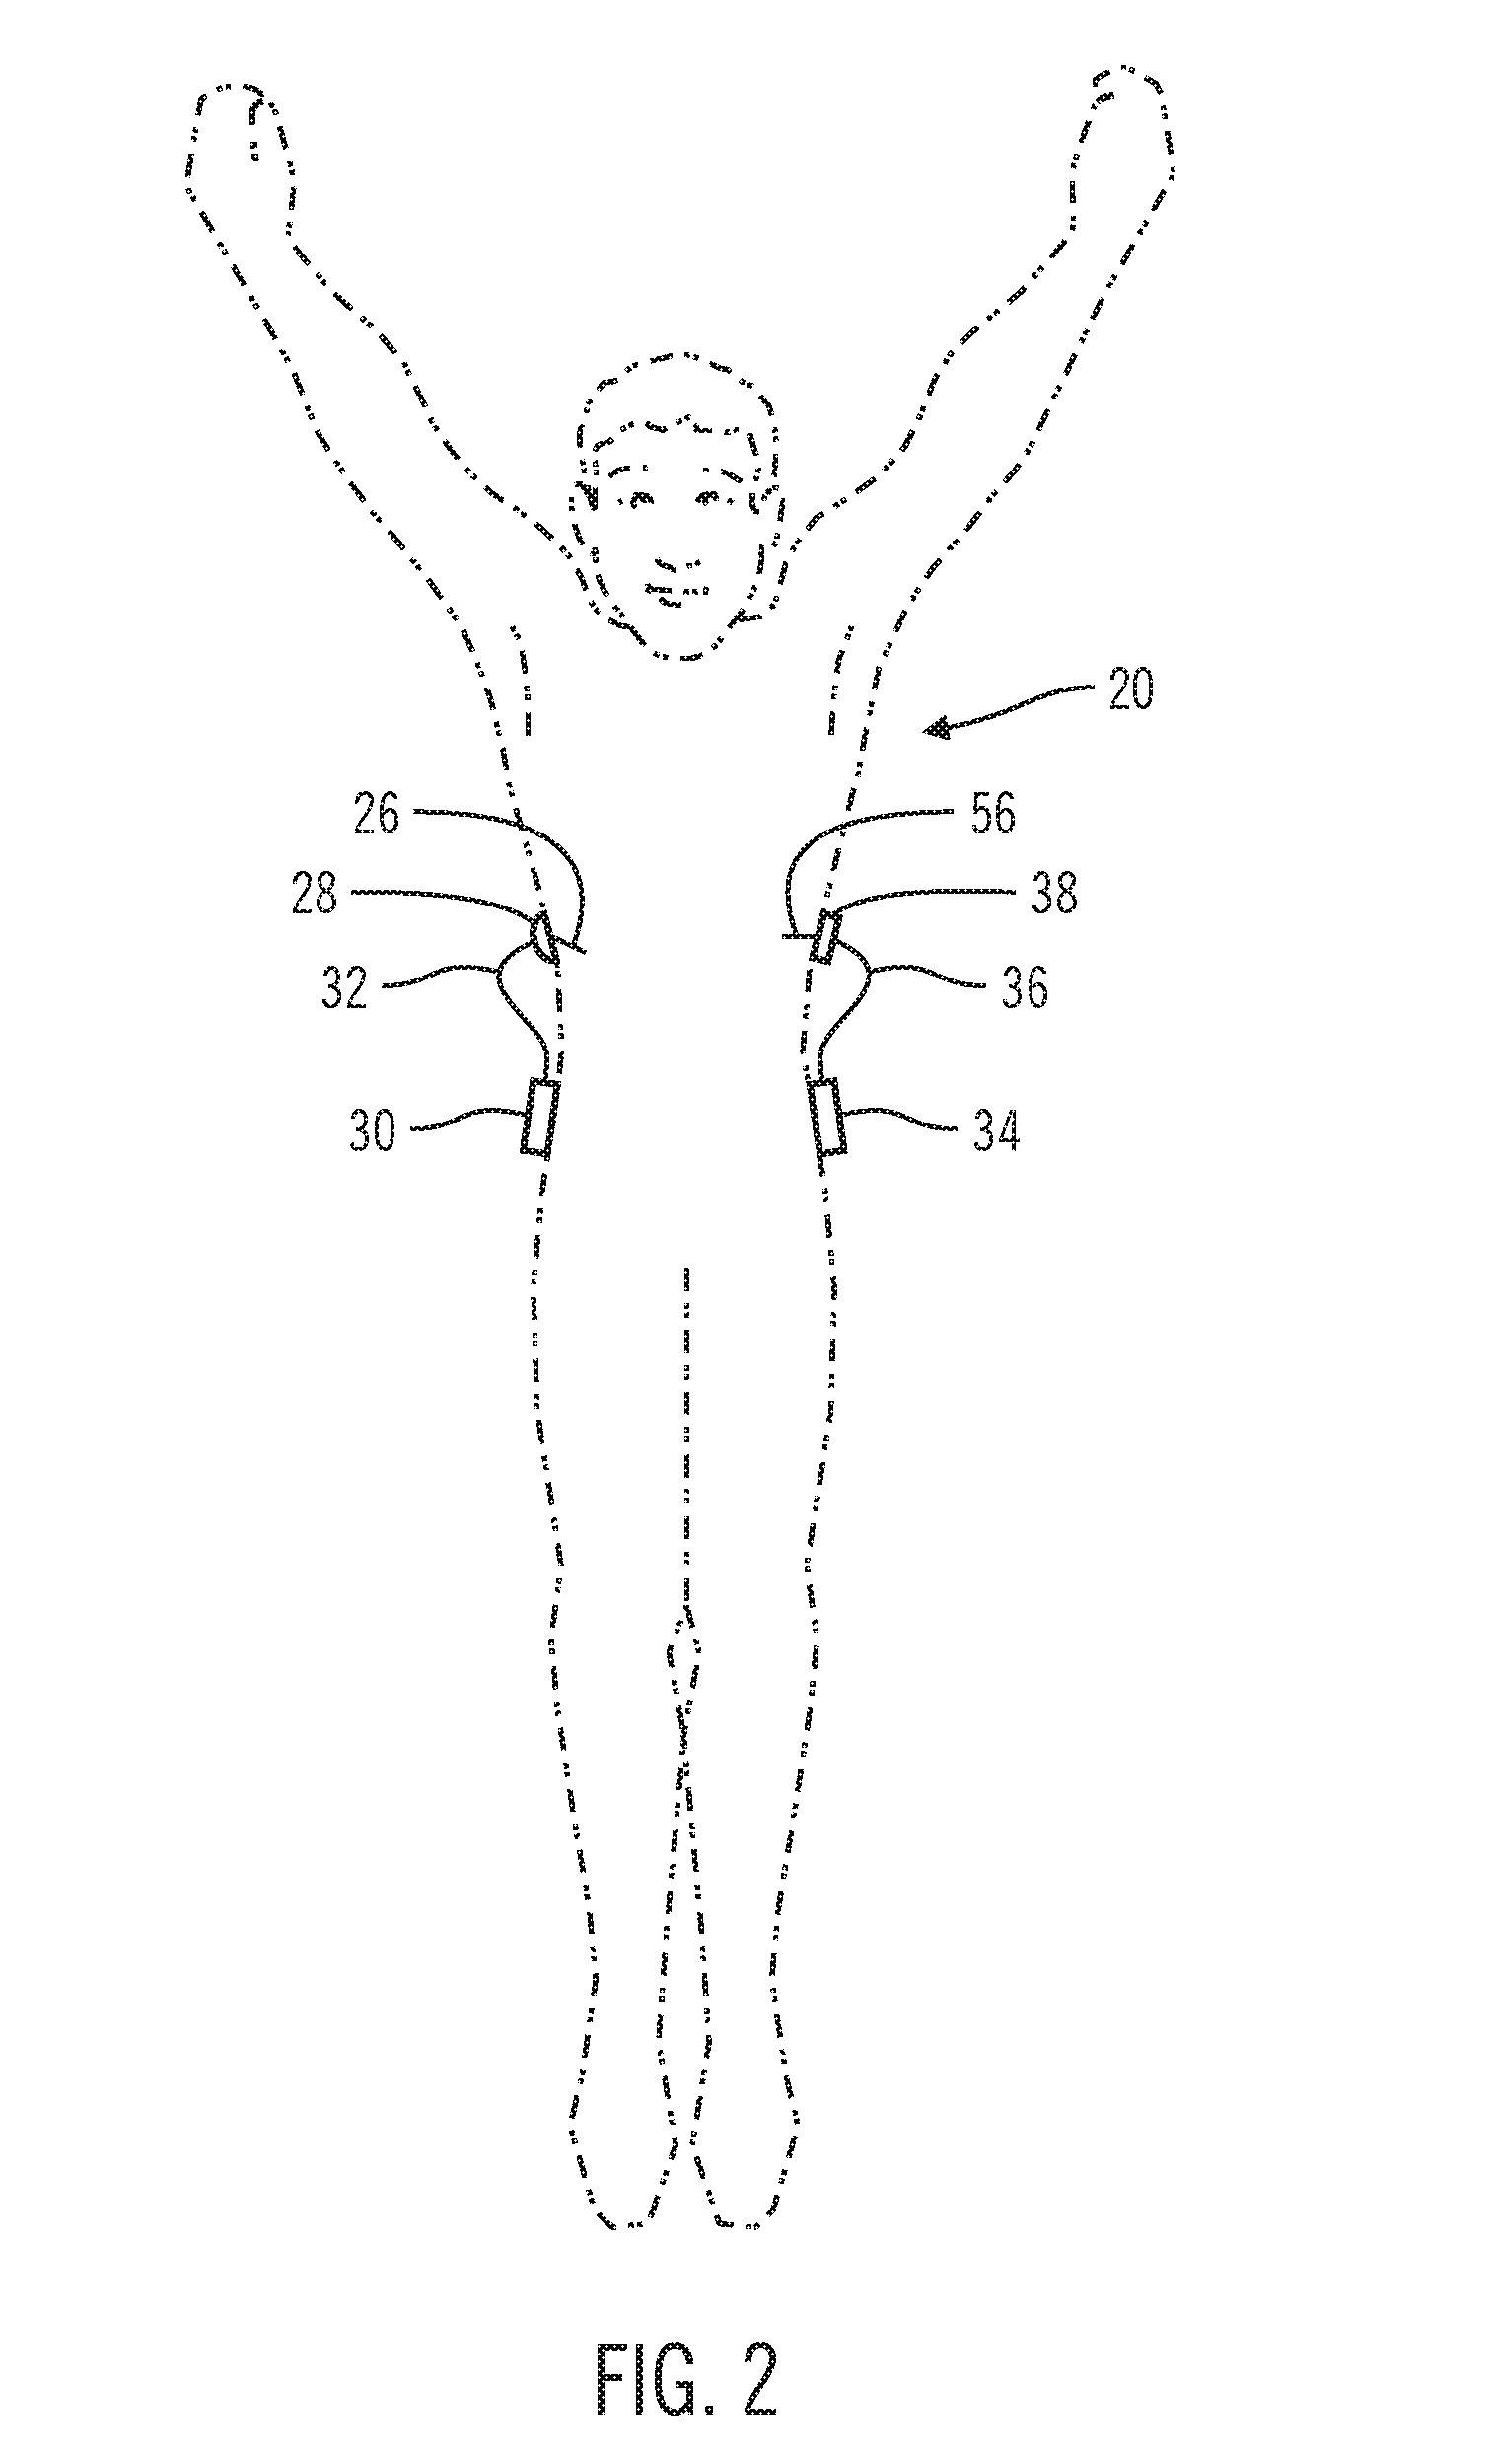 Sensor model supervisor for a closed-loop insulin infusion system